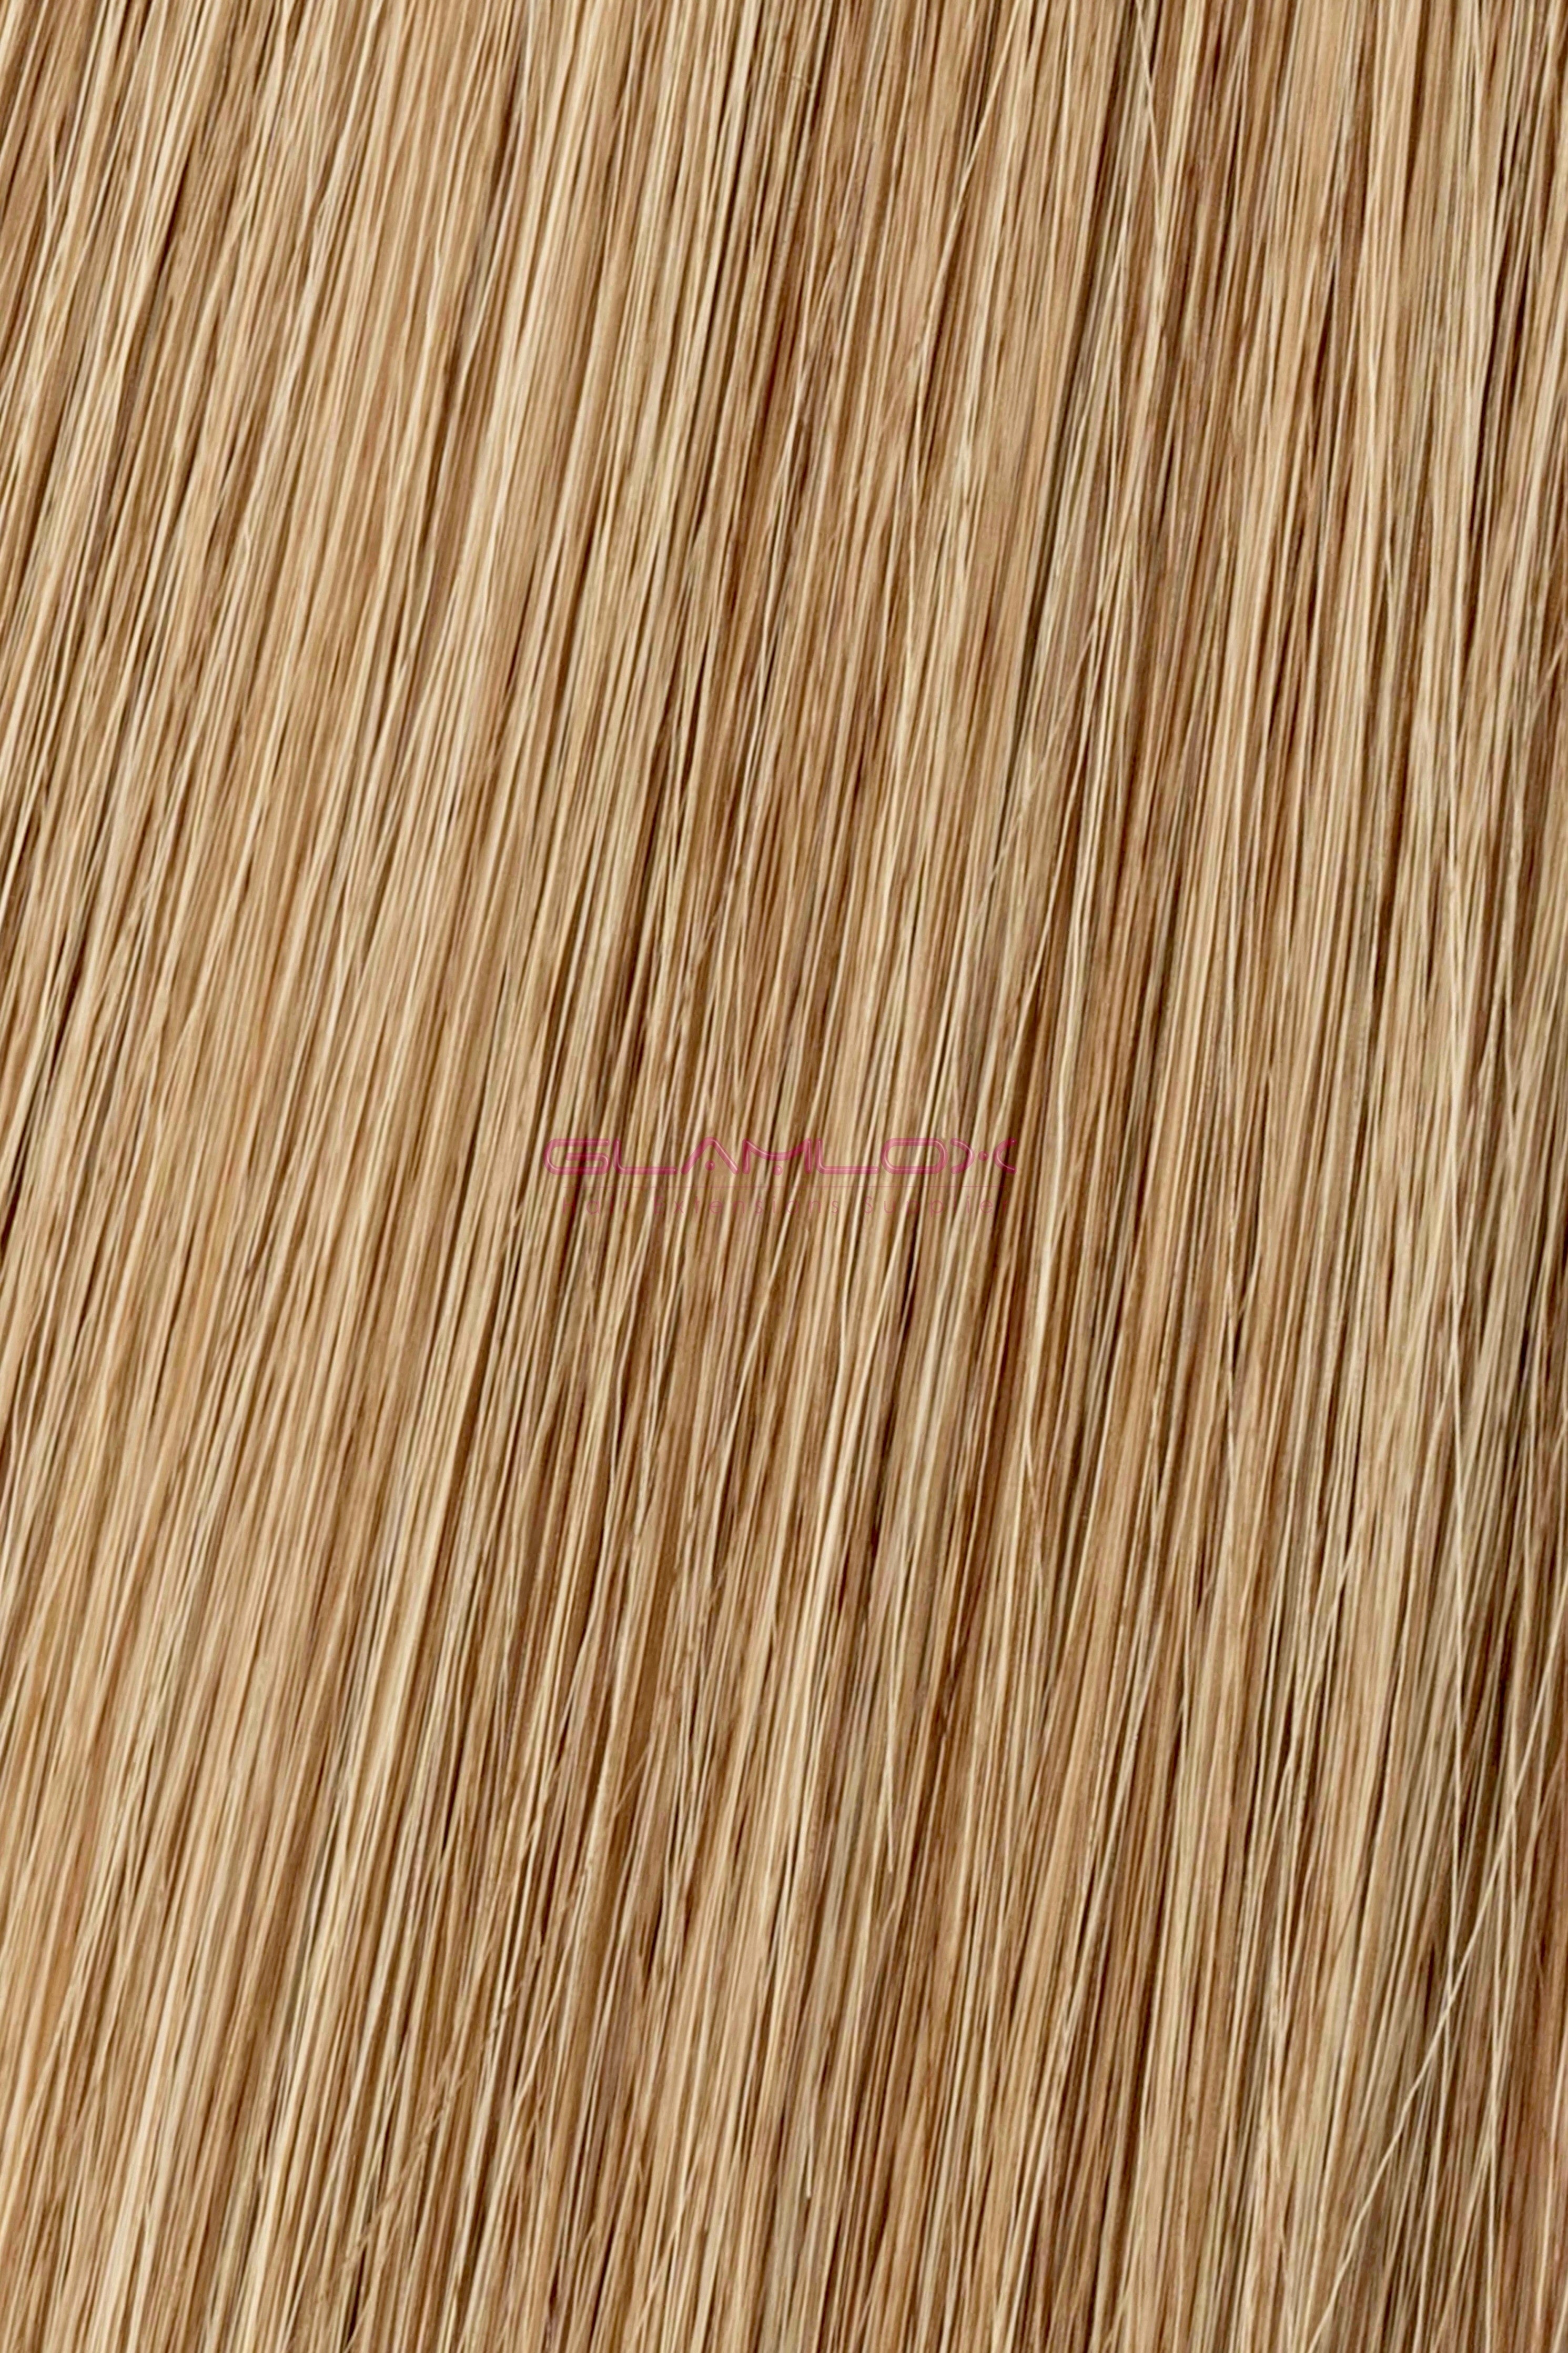 18" Nano Ring Hair Extensions - Russian Mongolian Double Drawn Remy Human Hair  - 20 Strands